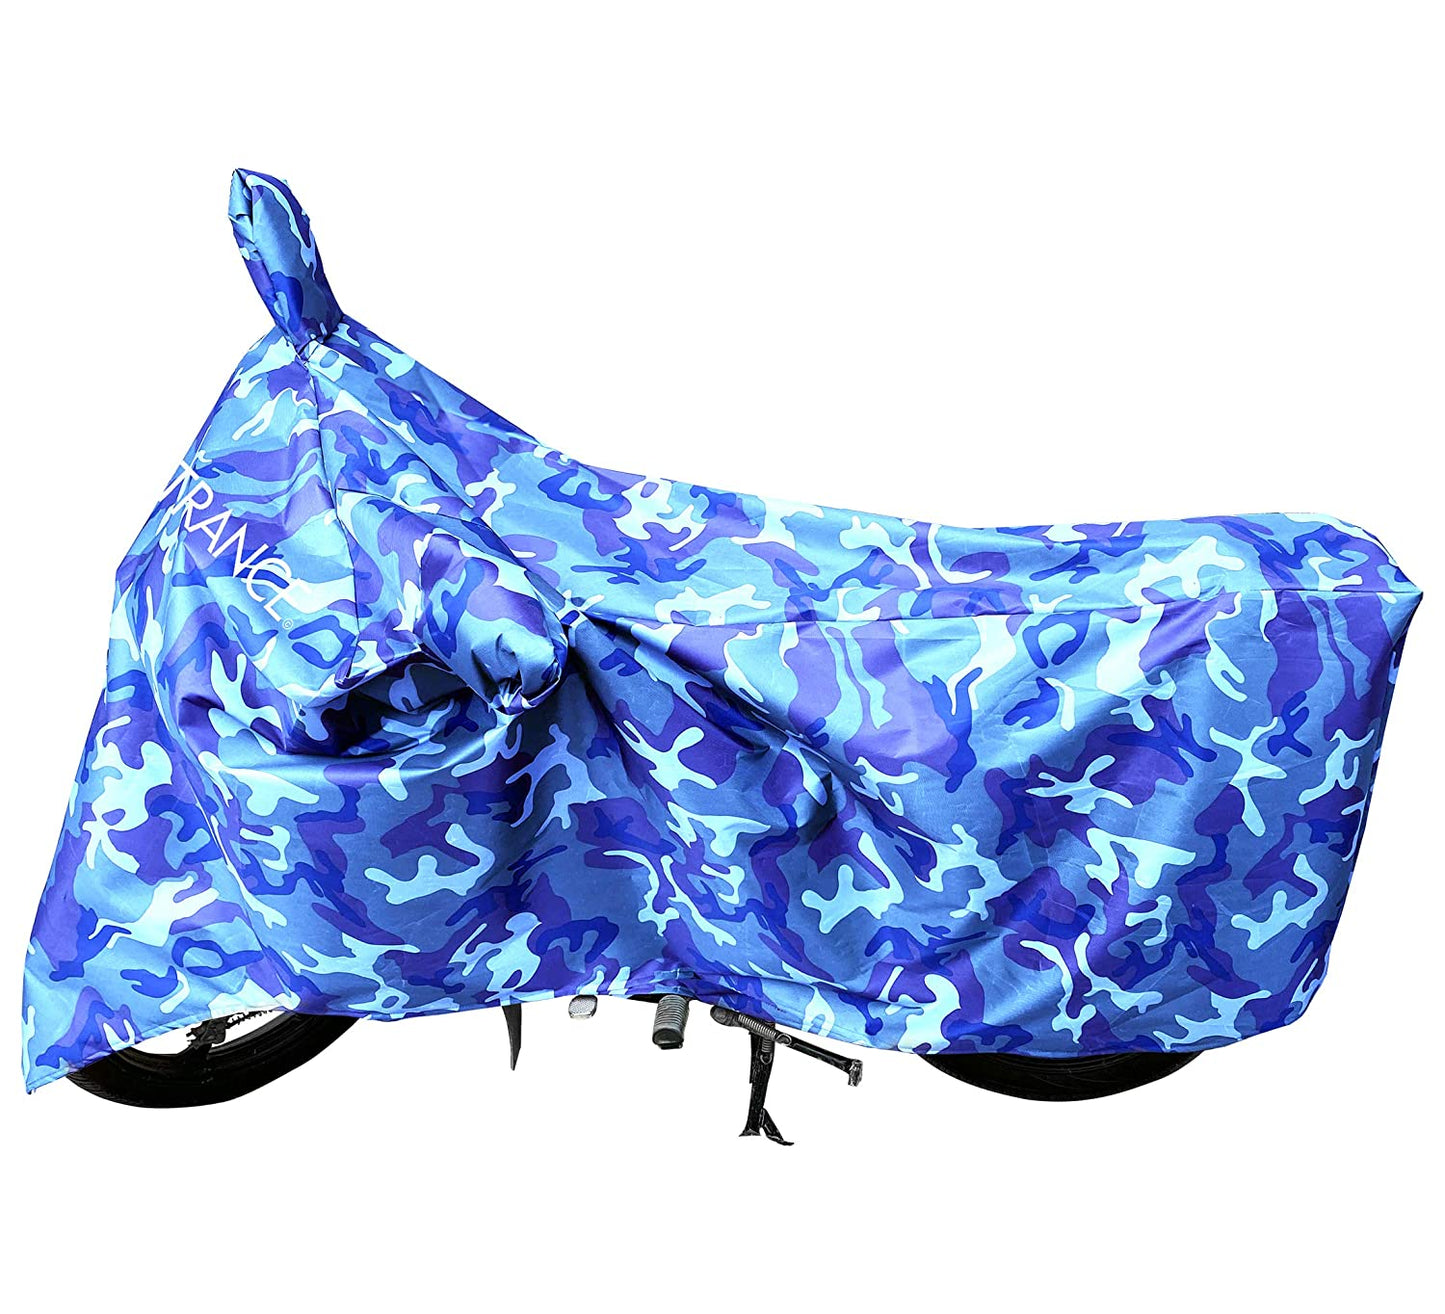 MotoTrance Jungle Bike Body Covers For RevoltÂ  RV 400 2019 - Interlock-Stitched Waterproof and Heat Resistant with Mirror Pockets